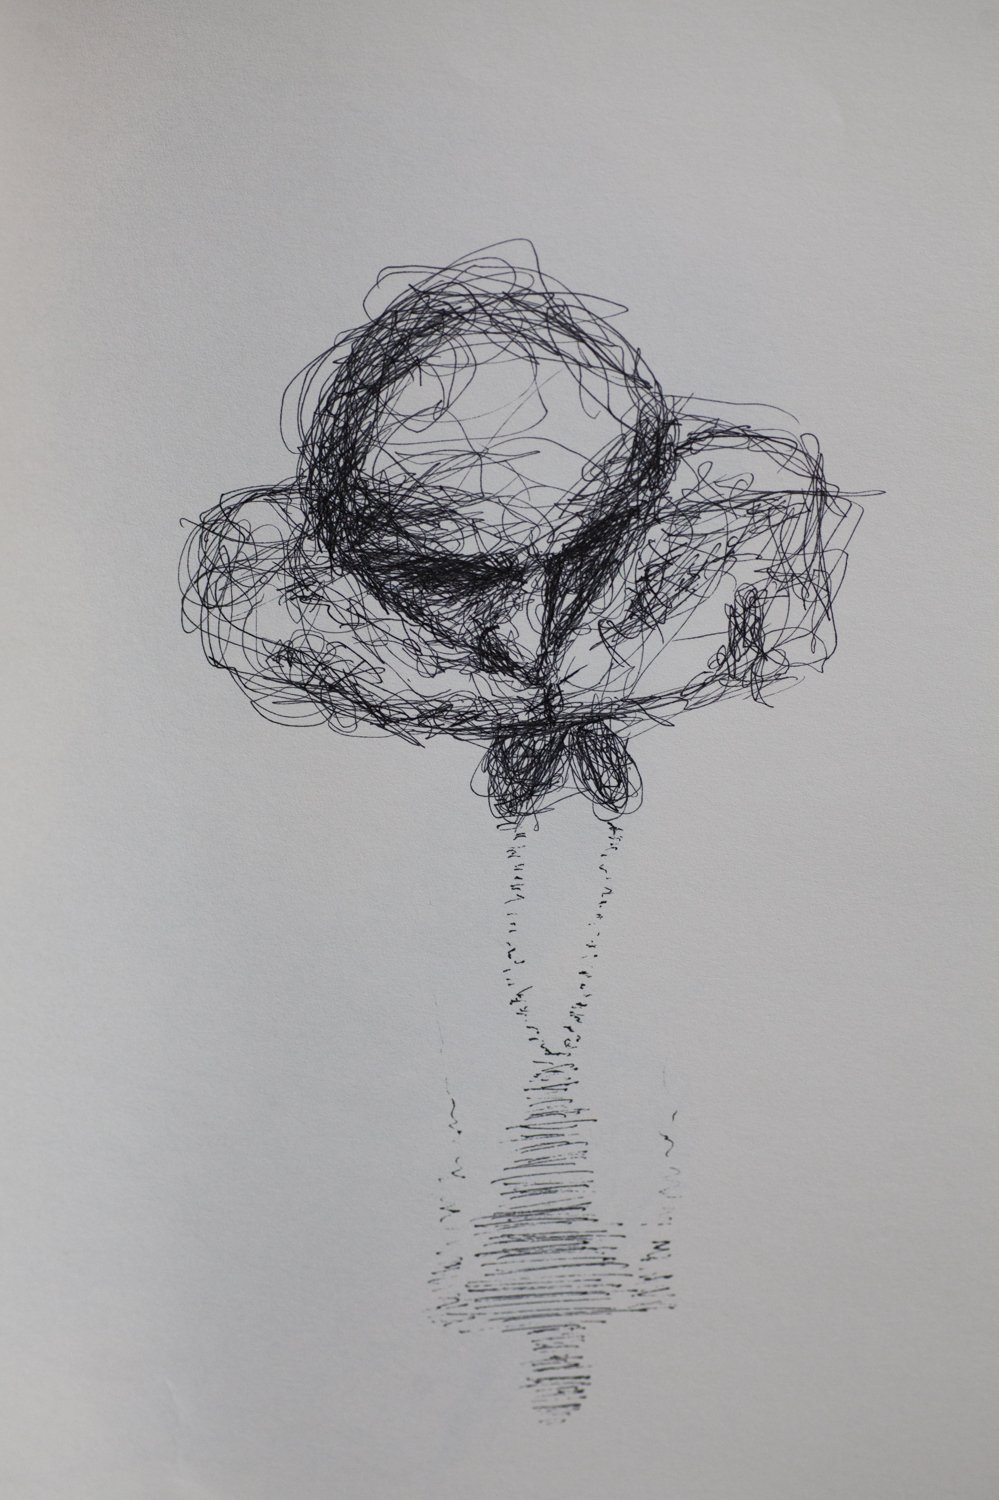   Untitled.       2019. Ink on Paper.  5.5 x 8.5 in (14 x 21.6 cm) 